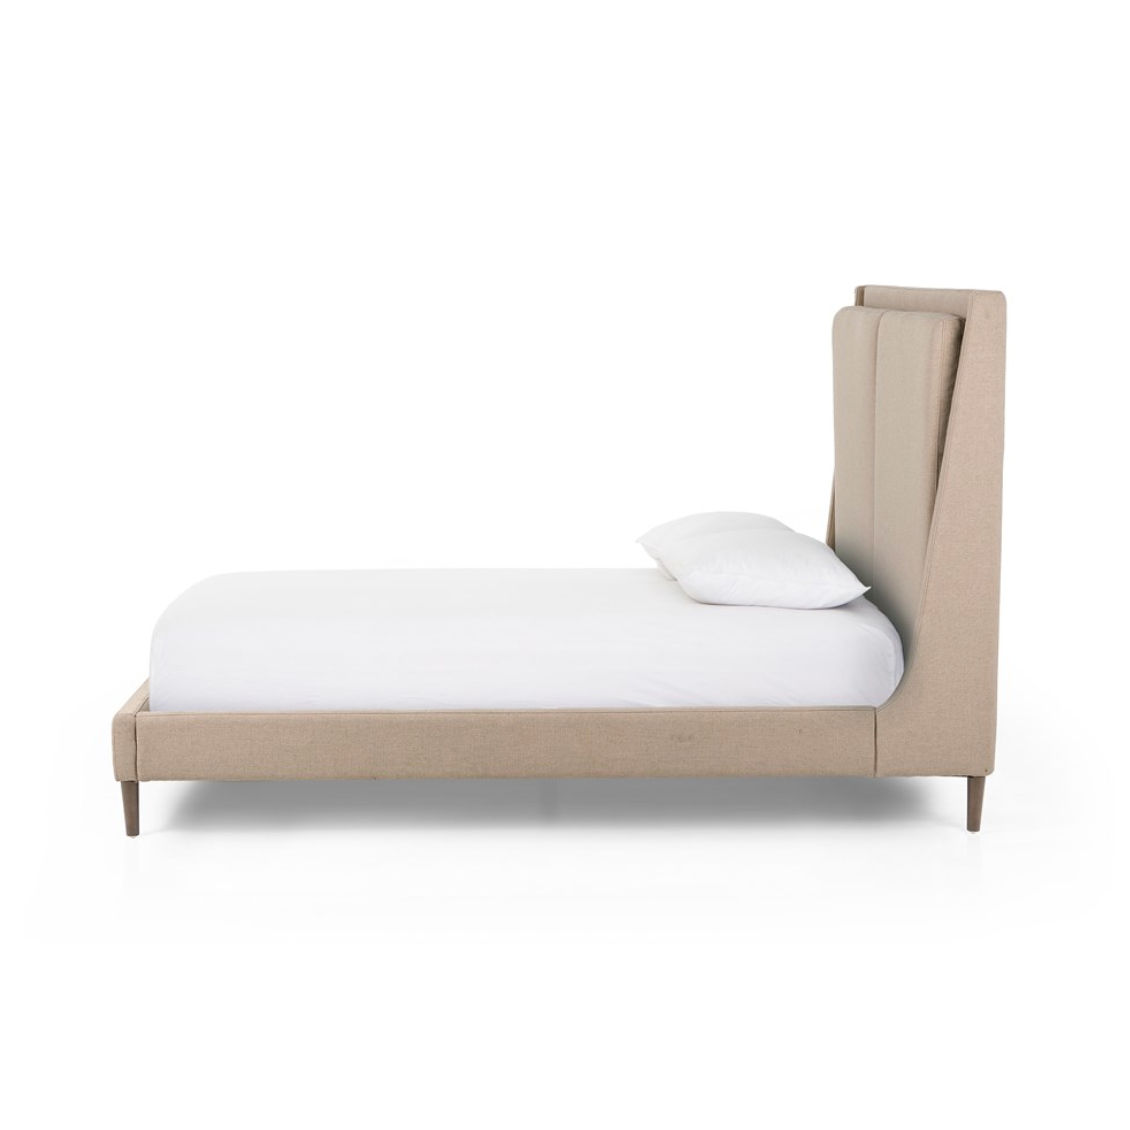 Potter Taupe Bed